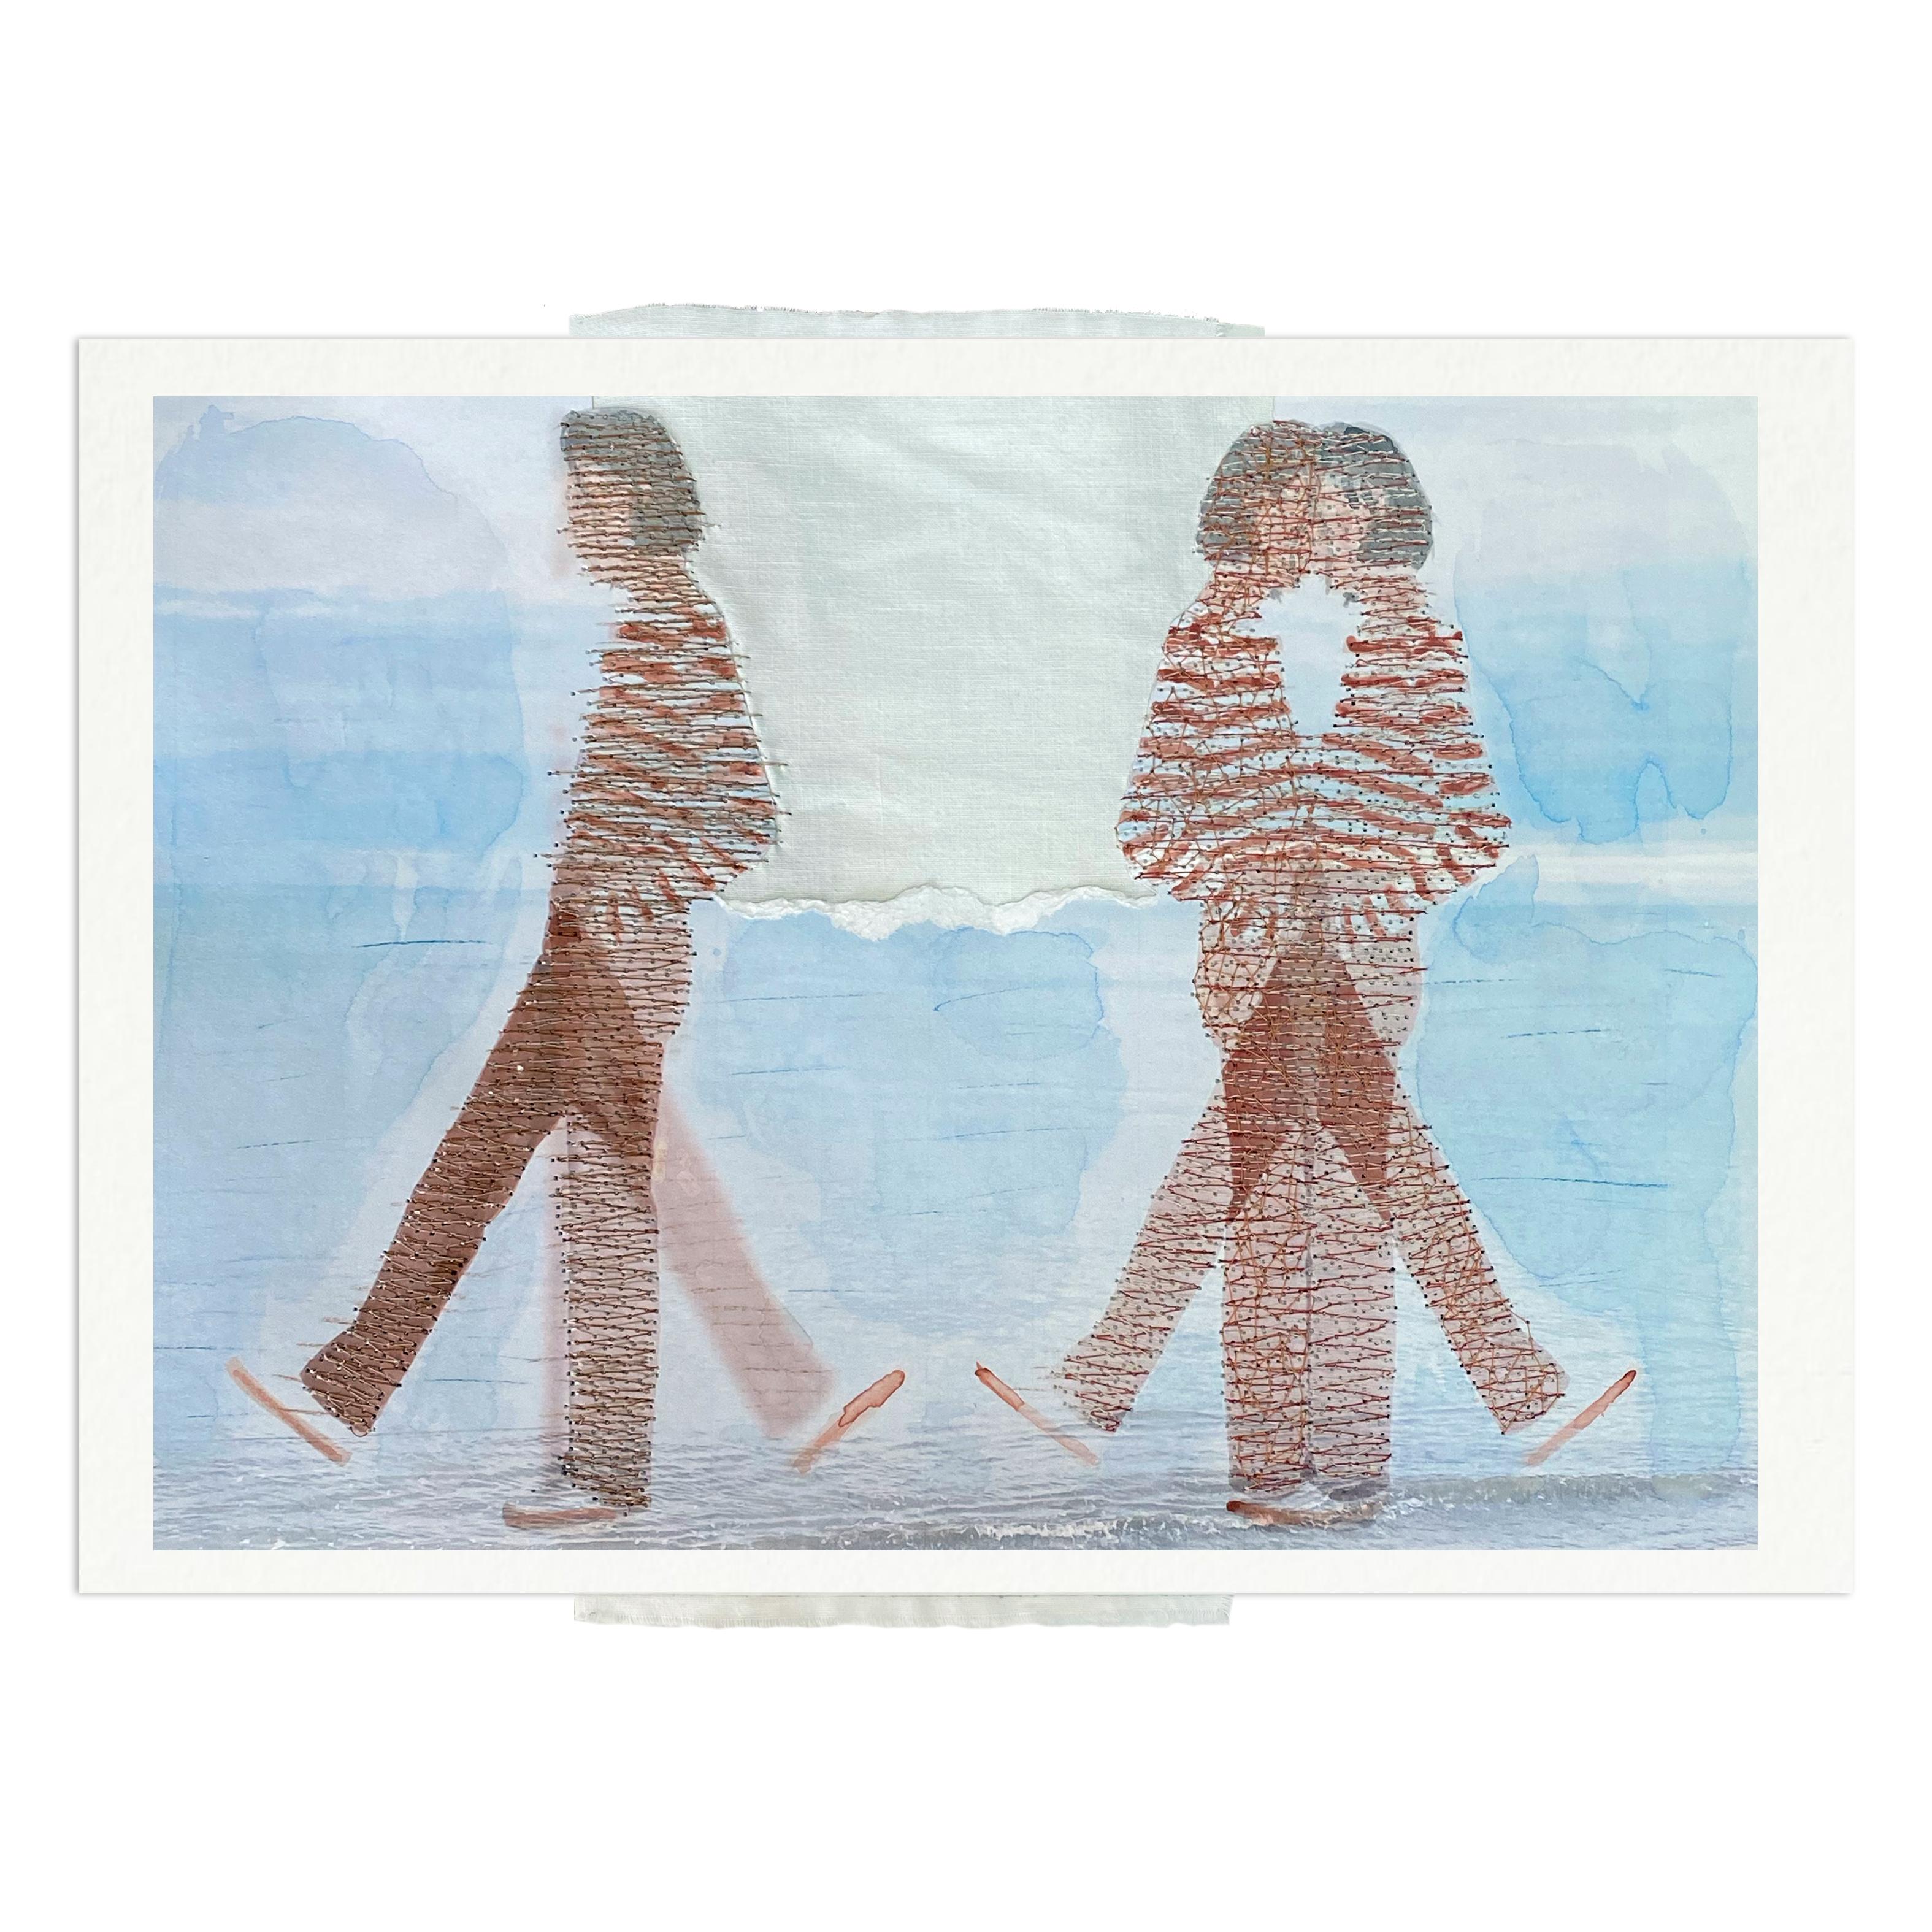 Michele Landel Figurative Photograph - Striding- blue red contemporary photo transfer of women on paper with thread